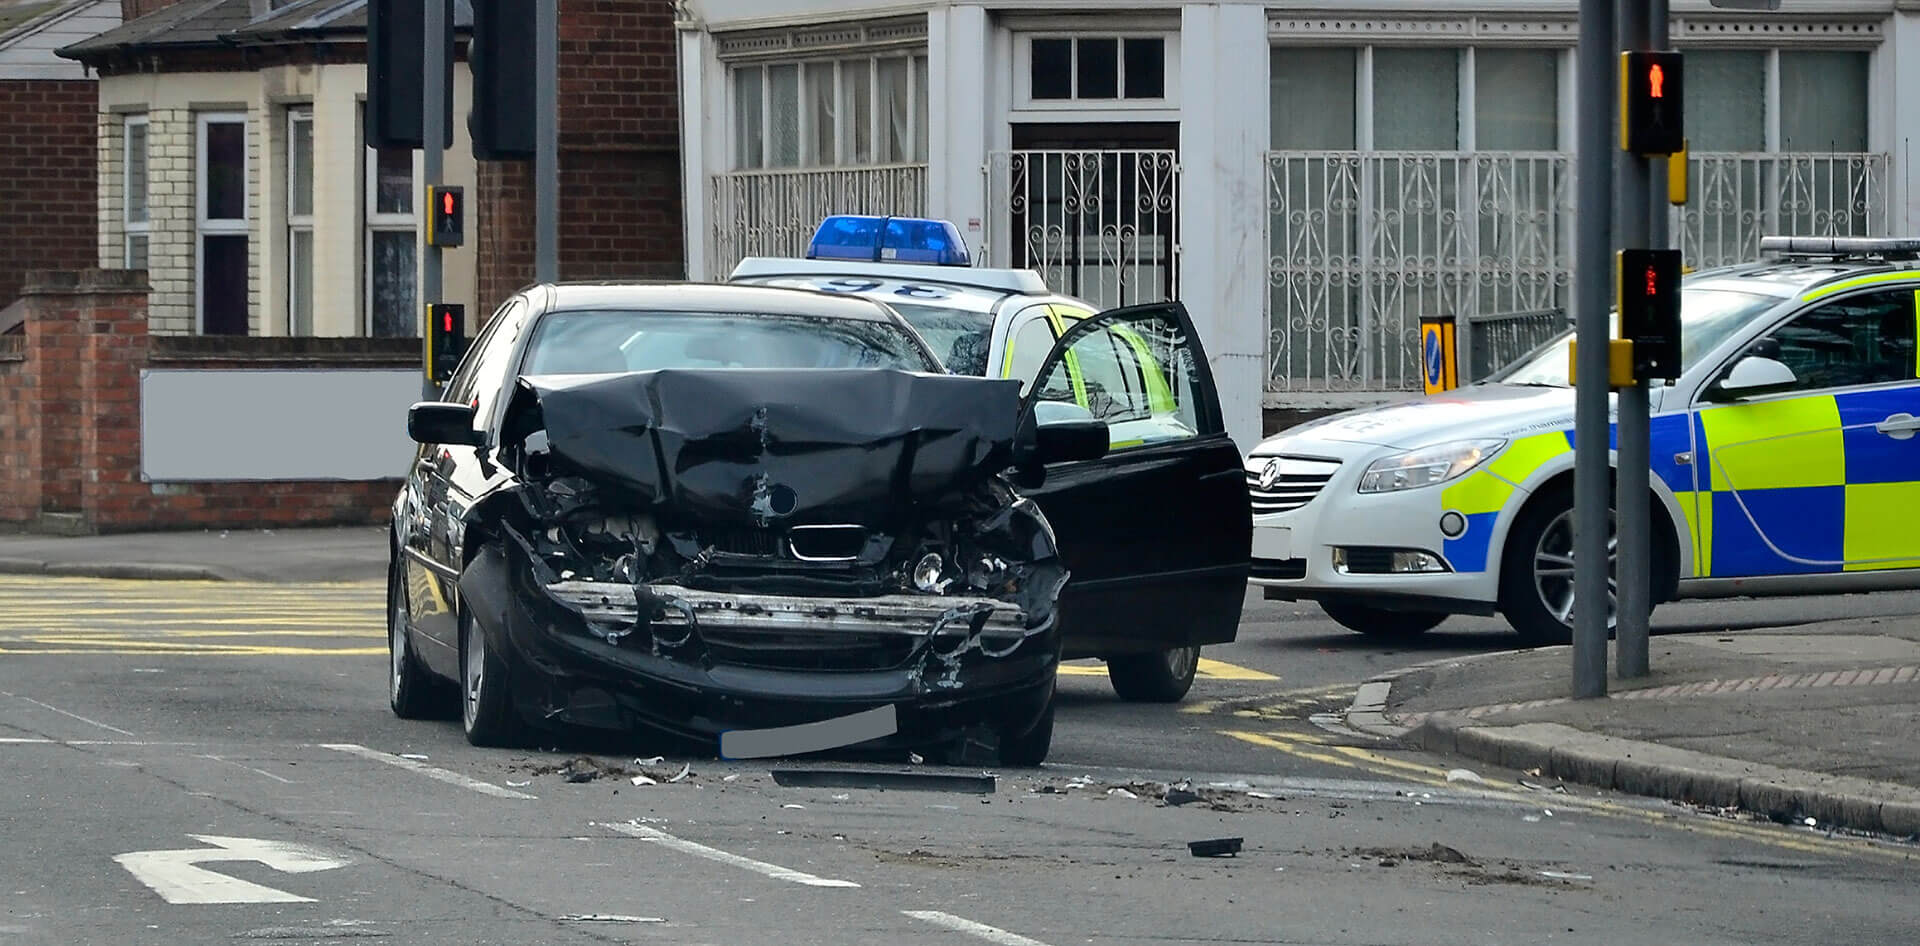 Car involved in road traffic accident